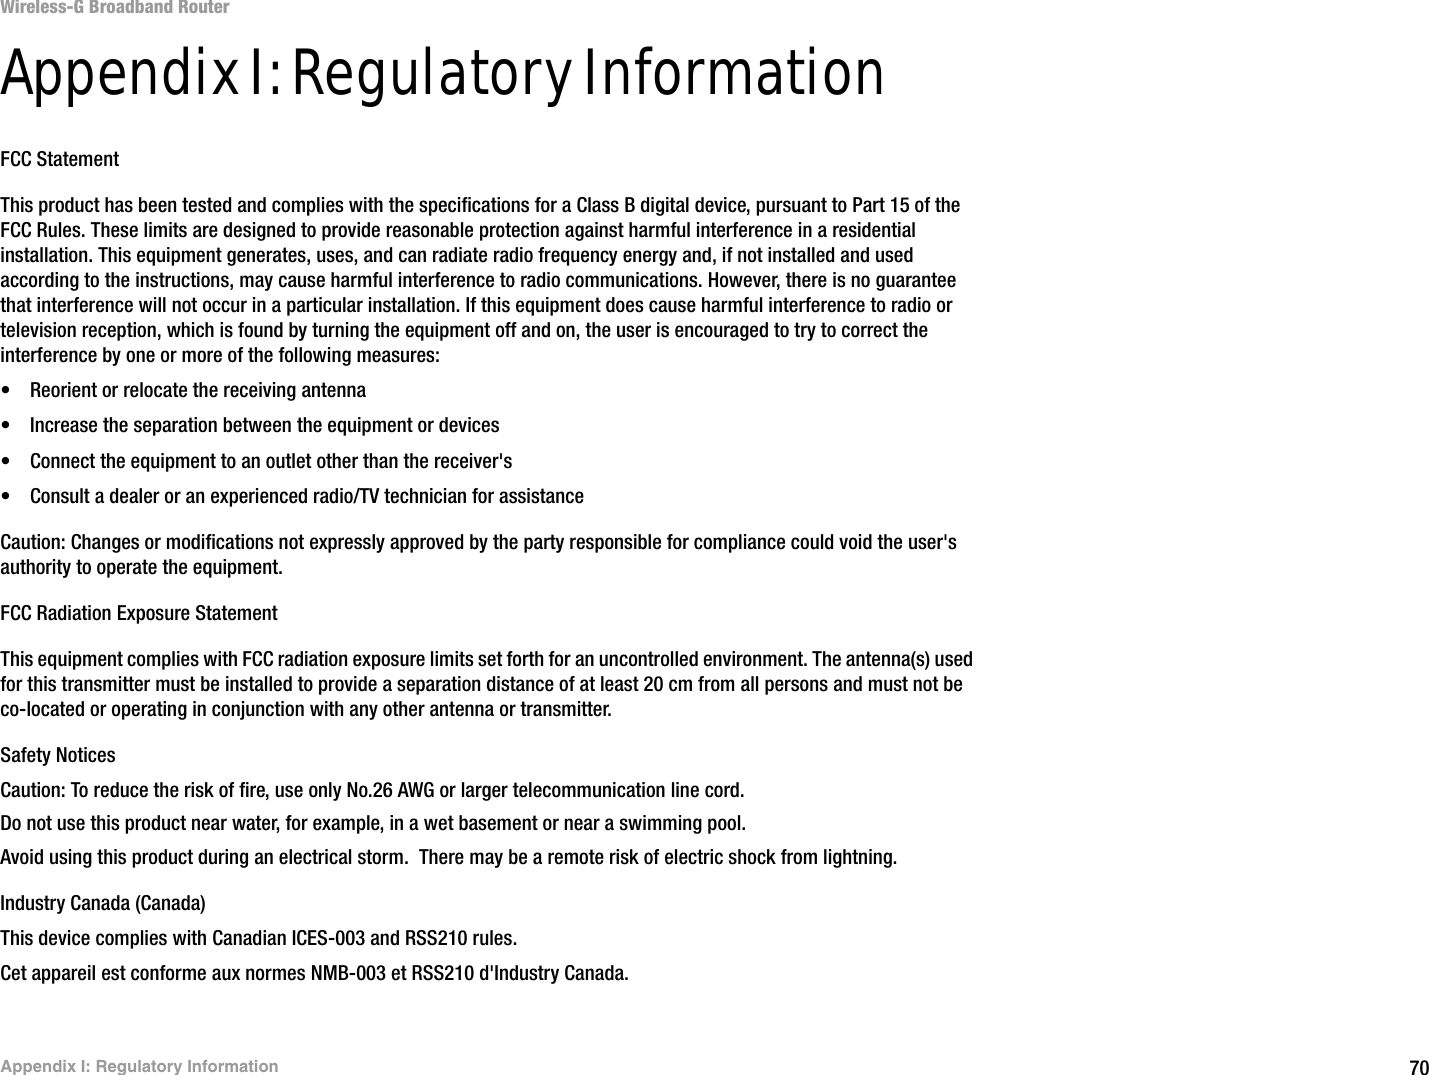 70Appendix I: Regulatory InformationWireless-G Broadband RouterAppendix I: Regulatory InformationFCC StatementThis product has been tested and complies with the specifications for a Class B digital device, pursuant to Part 15 of the FCC Rules. These limits are designed to provide reasonable protection against harmful interference in a residential installation. This equipment generates, uses, and can radiate radio frequency energy and, if not installed and used according to the instructions, may cause harmful interference to radio communications. However, there is no guarantee that interference will not occur in a particular installation. If this equipment does cause harmful interference to radio or television reception, which is found by turning the equipment off and on, the user is encouraged to try to correct the interference by one or more of the following measures:• Reorient or relocate the receiving antenna• Increase the separation between the equipment or devices• Connect the equipment to an outlet other than the receiver&apos;s• Consult a dealer or an experienced radio/TV technician for assistanceCaution: Changes or modifications not expressly approved by the party responsible for compliance could void the user&apos;s authority to operate the equipment.FCC Radiation Exposure StatementThis equipment complies with FCC radiation exposure limits set forth for an uncontrolled environment. The antenna(s) used for this transmitter must be installed to provide a separation distance of at least 20 cm from all persons and must not be co-located or operating in conjunction with any other antenna or transmitter.Safety NoticesCaution: To reduce the risk of fire, use only No.26 AWG or larger telecommunication line cord.Do not use this product near water, for example, in a wet basement or near a swimming pool.Avoid using this product during an electrical storm.  There may be a remote risk of electric shock from lightning.Industry Canada (Canada)This device complies with Canadian ICES-003 and RSS210 rules.Cet appareil est conforme aux normes NMB-003 et RSS210 d&apos;Industry Canada.